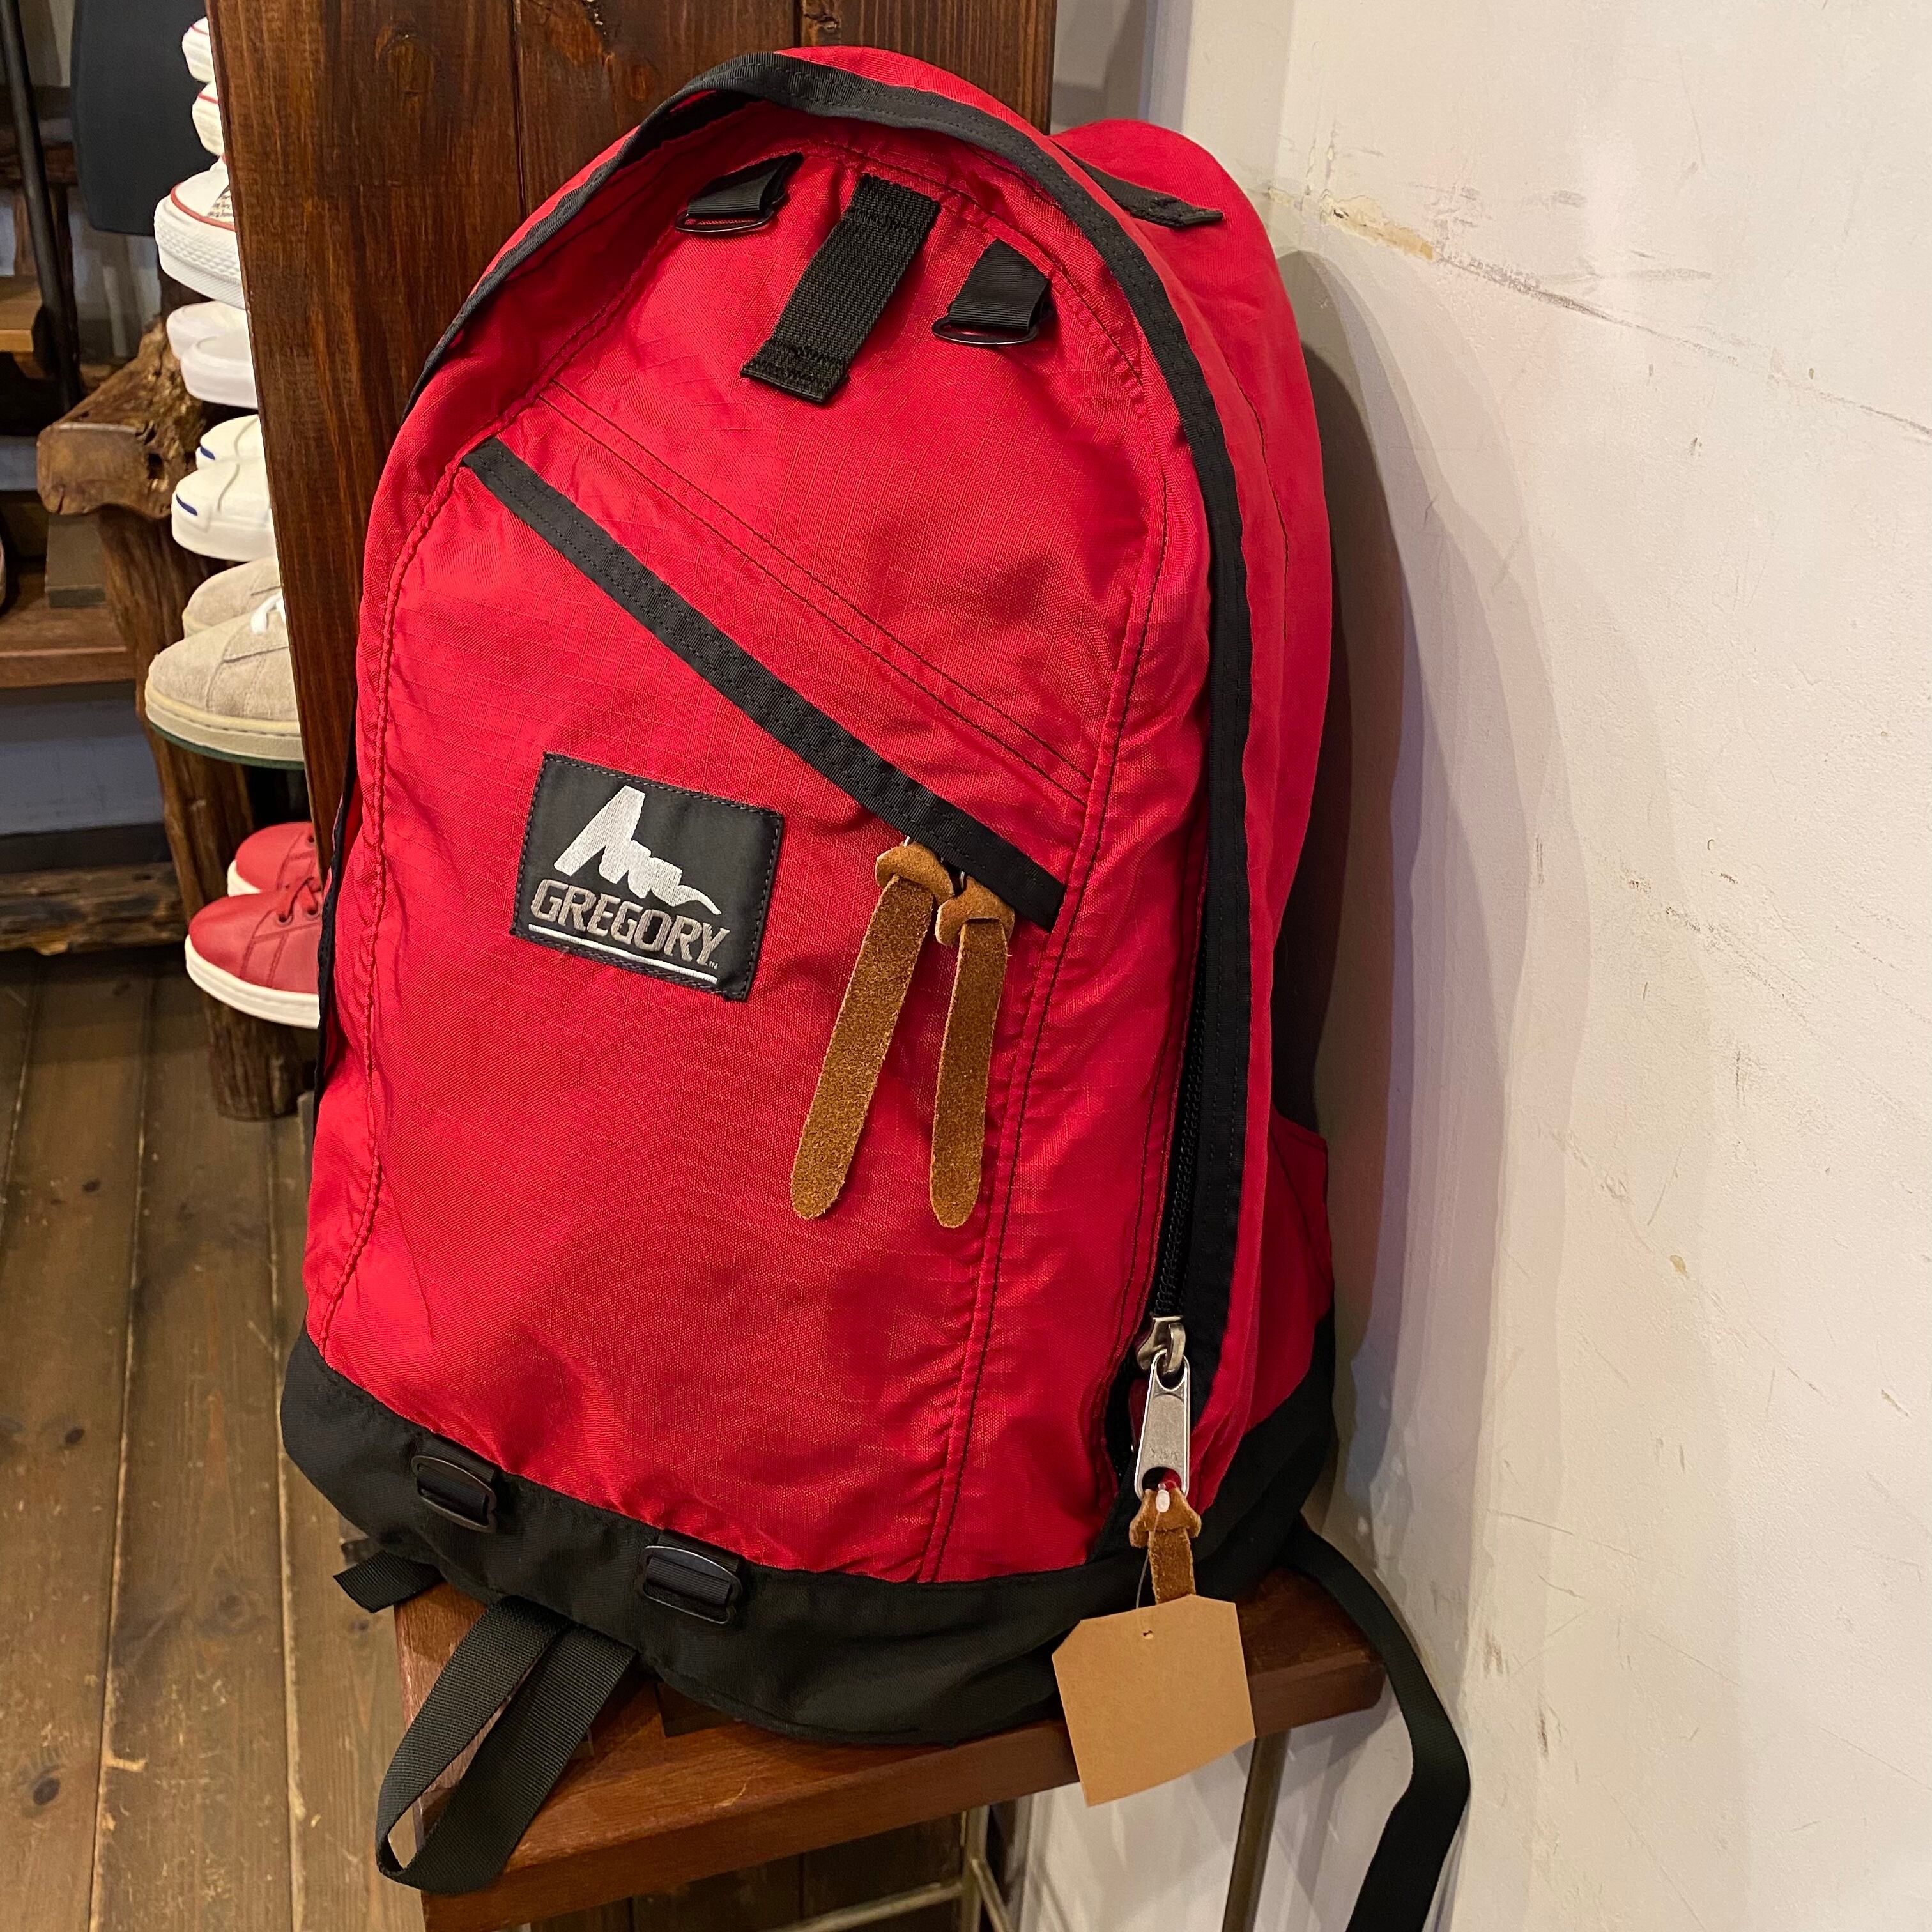 【RUCK SACK】GREGORY, USA, RED